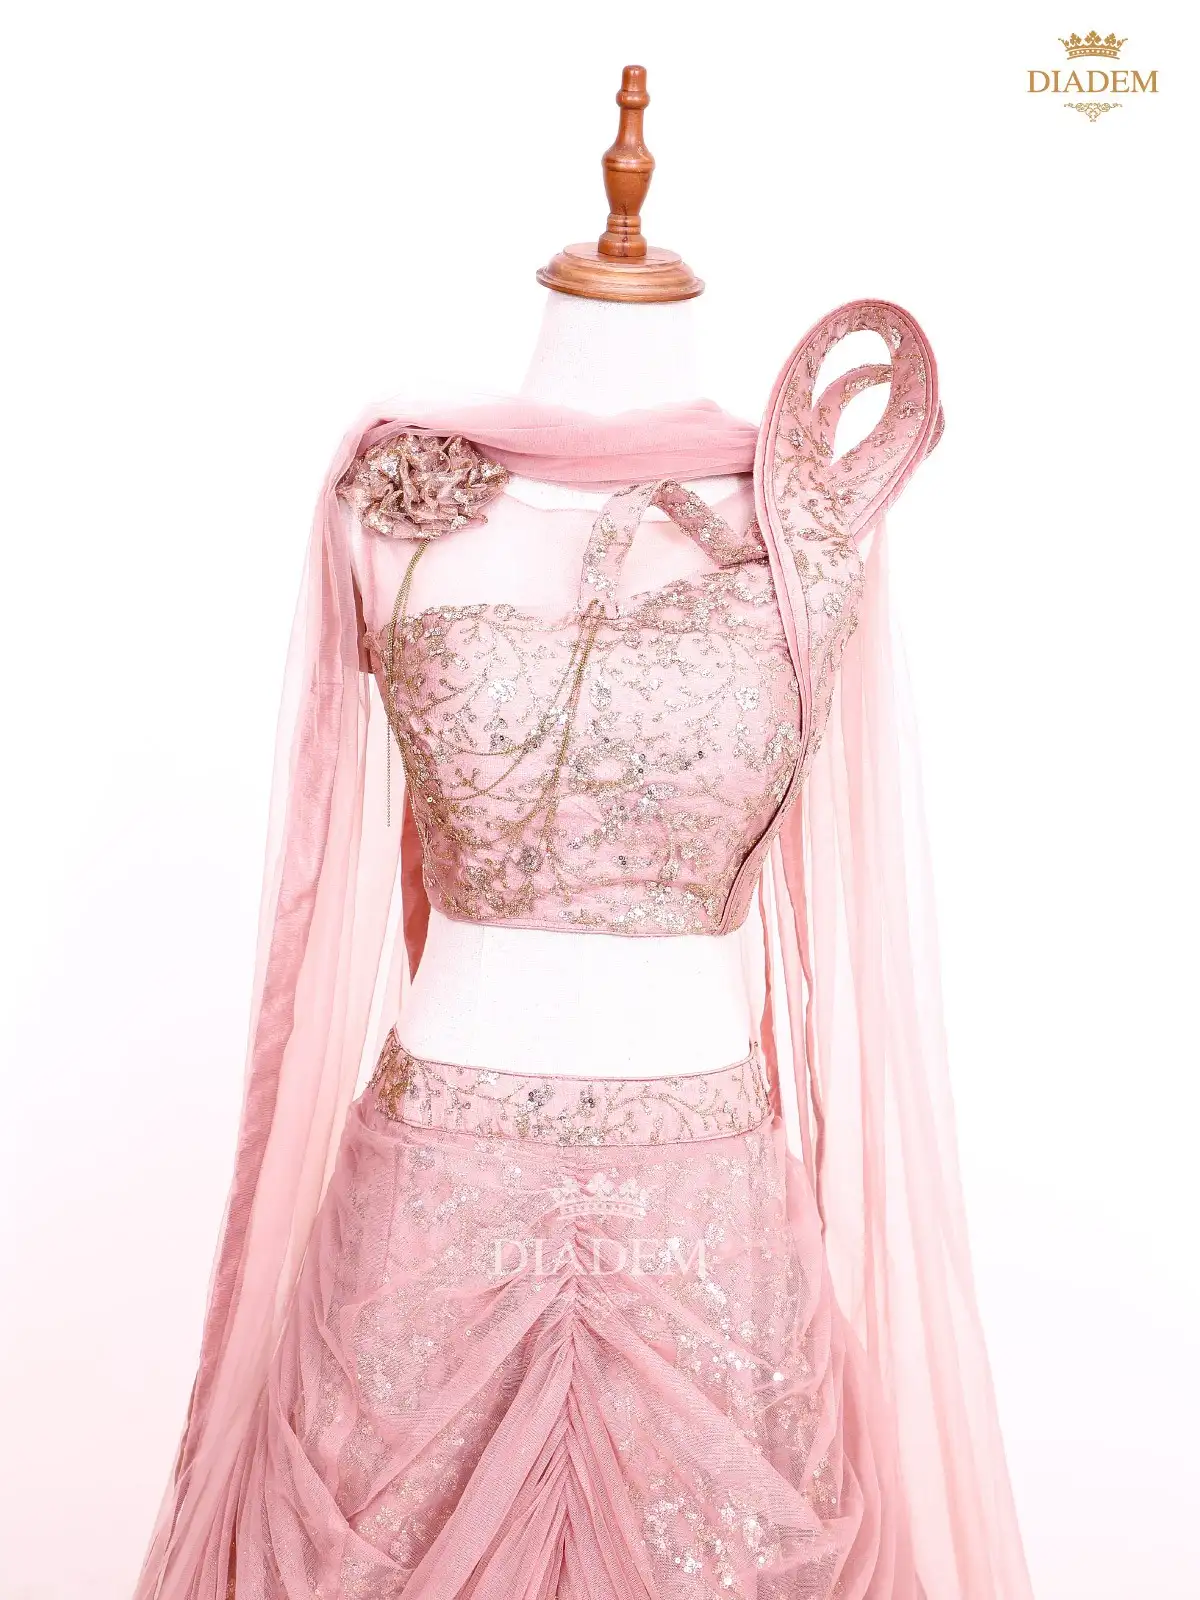 Baby Pink Lehenga Embellished In Floral Laces And Sequins With Dupatta